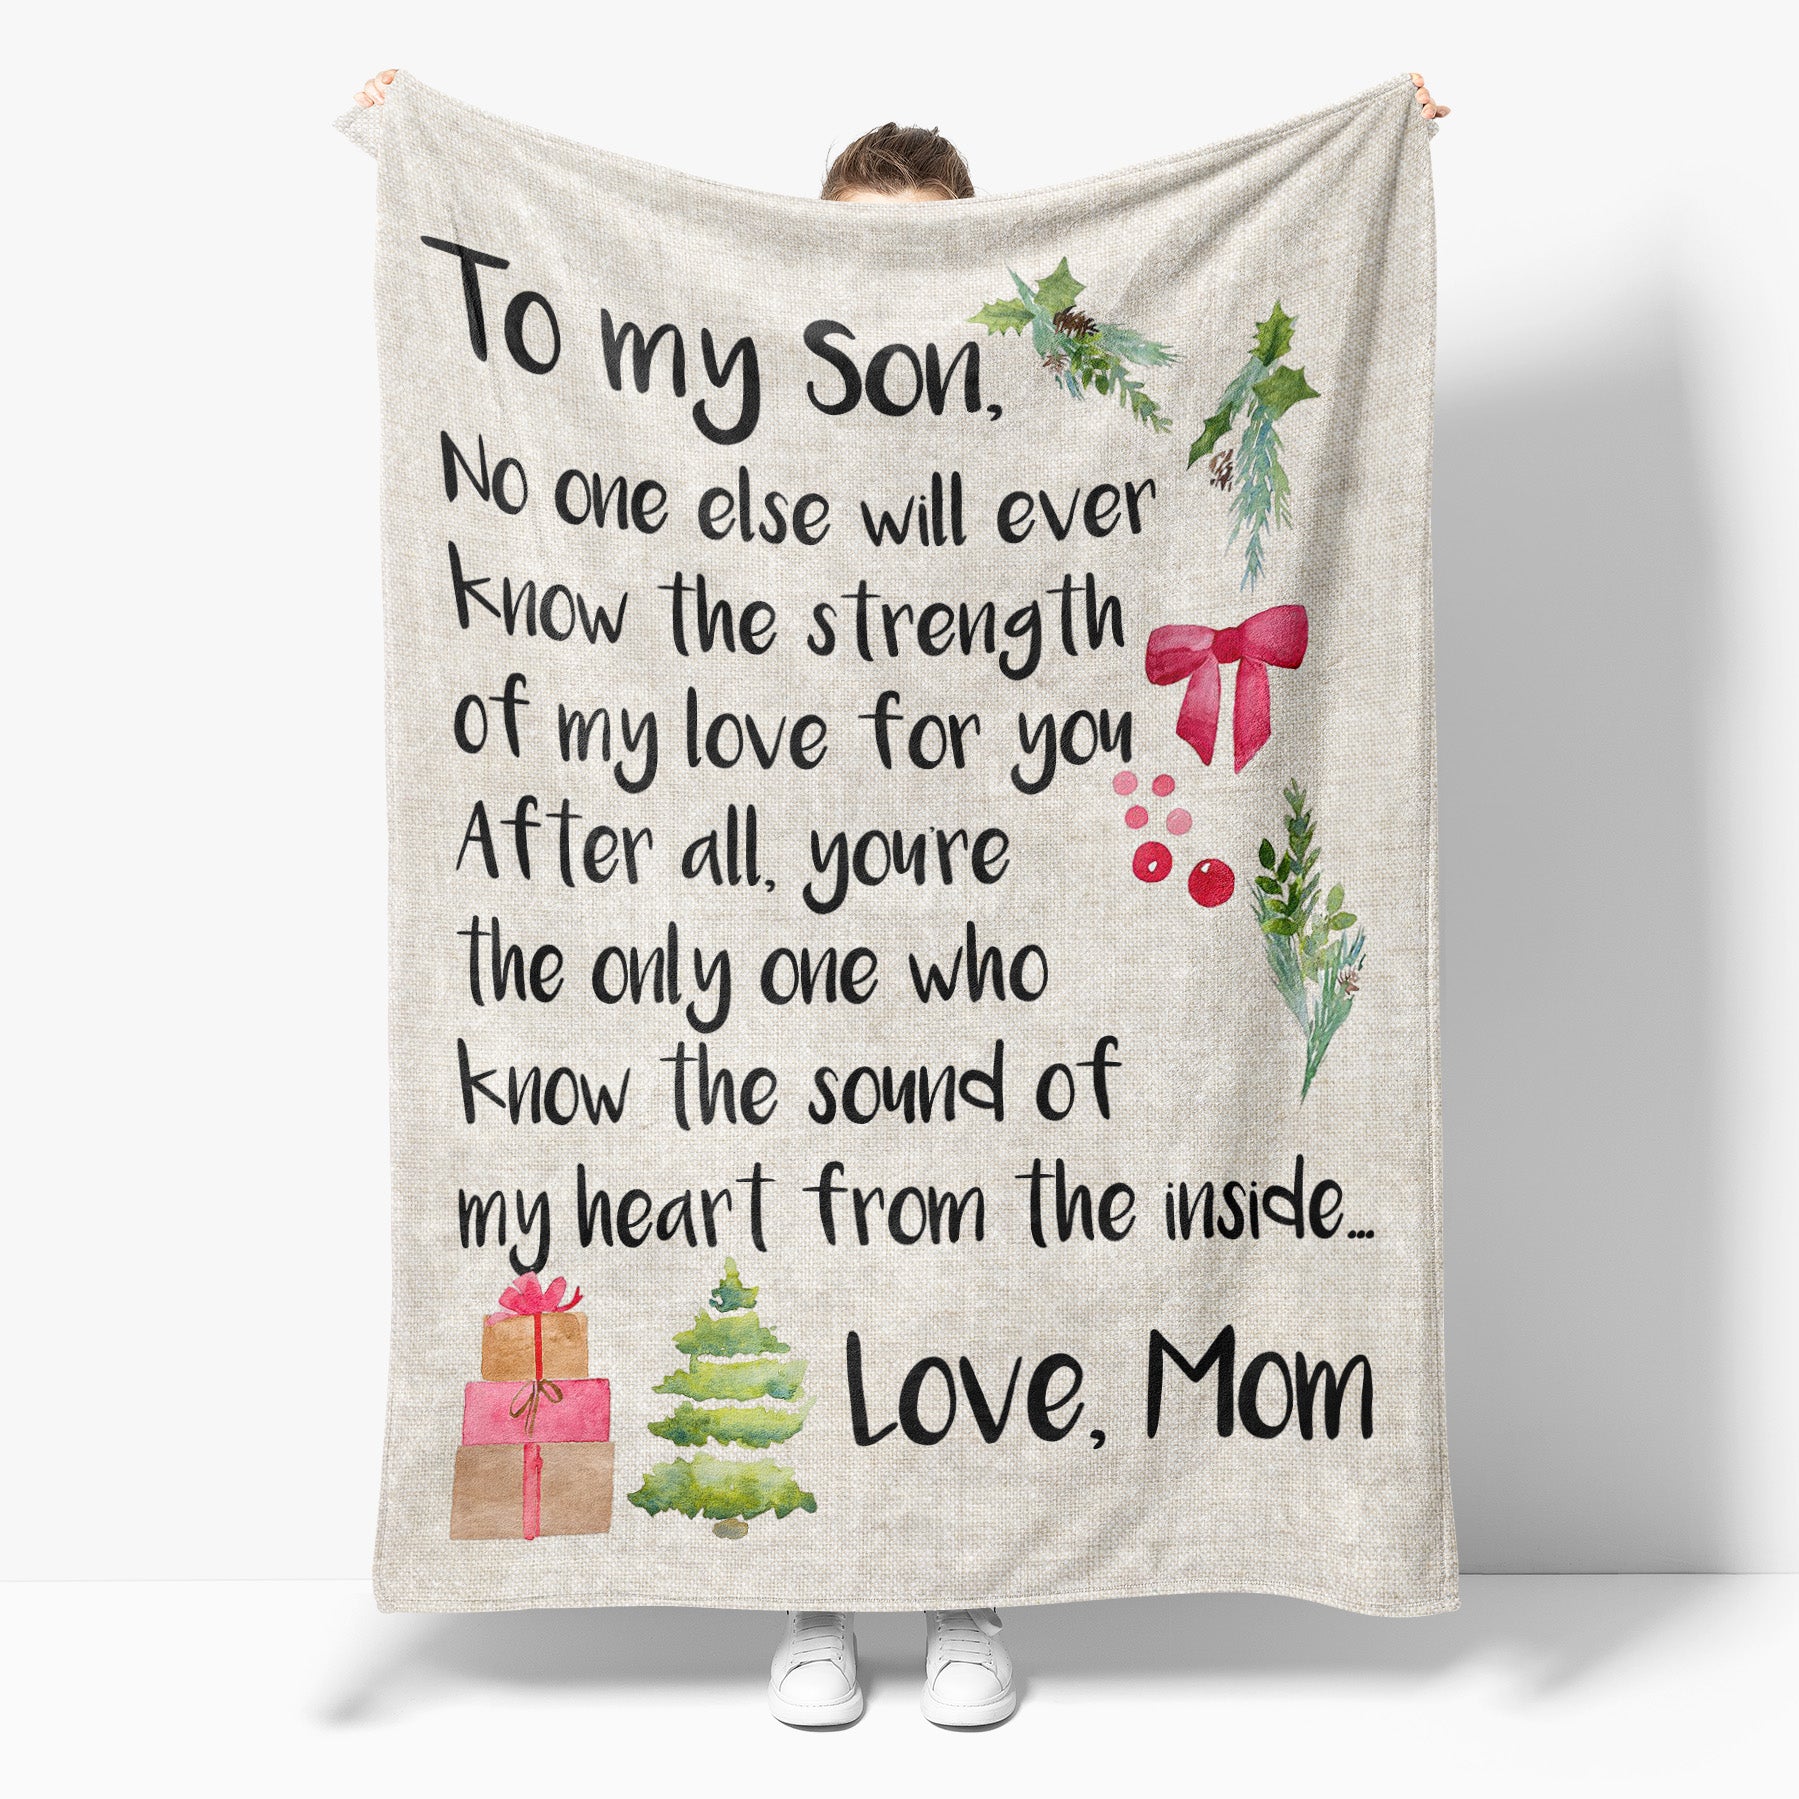 Blanket Gifts For Sons From Mothers, Birthday Gift Ideas For Son, No One Else Know